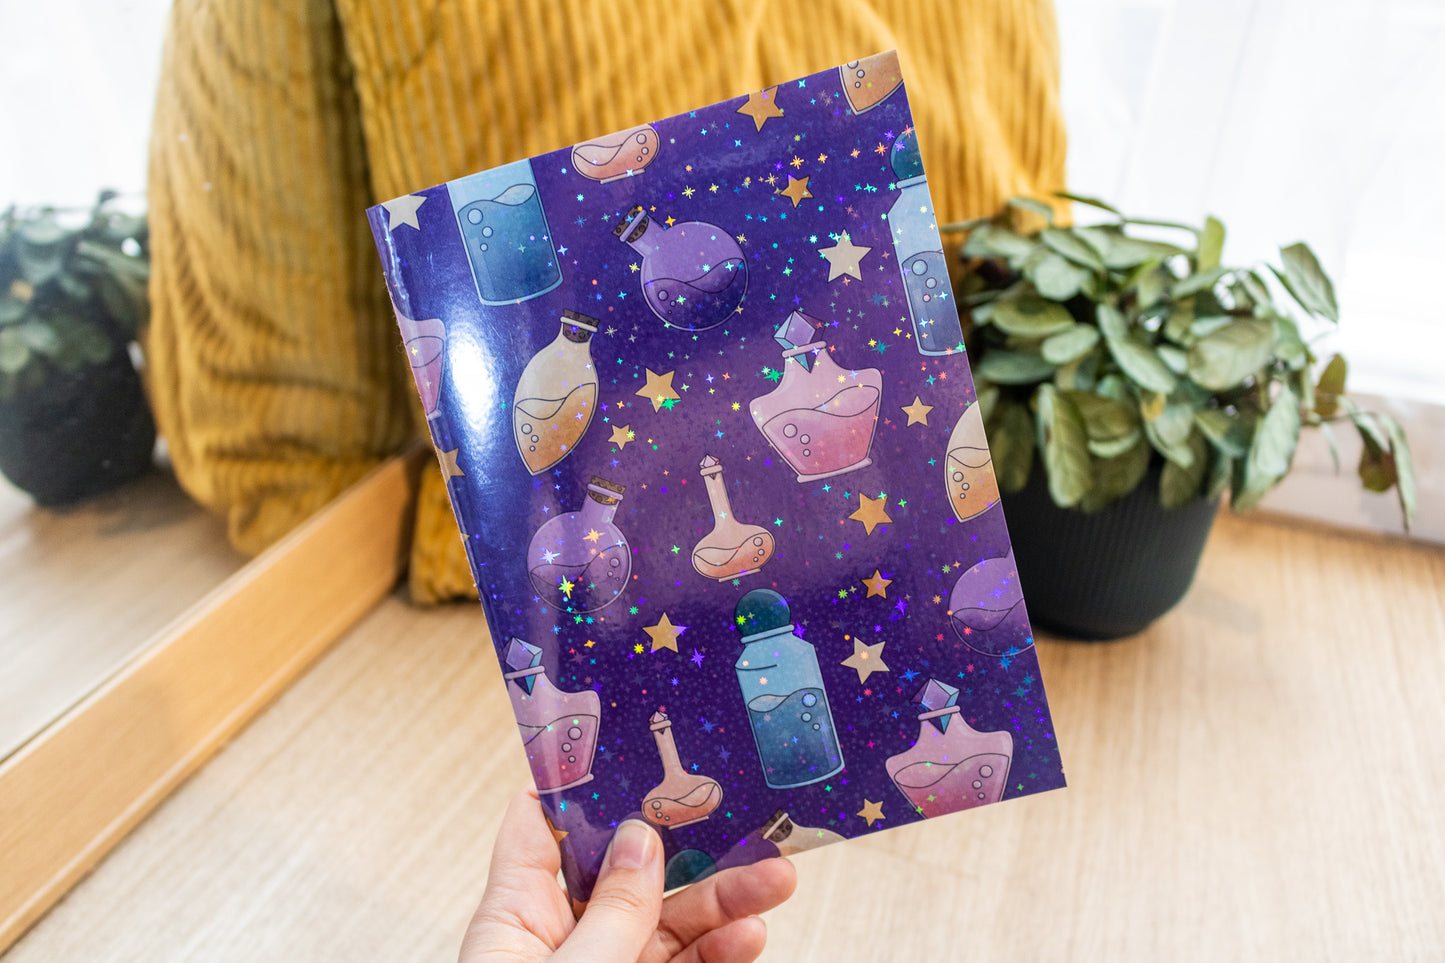 A5 Handmade Notebook with Holographic Magic Potion Design